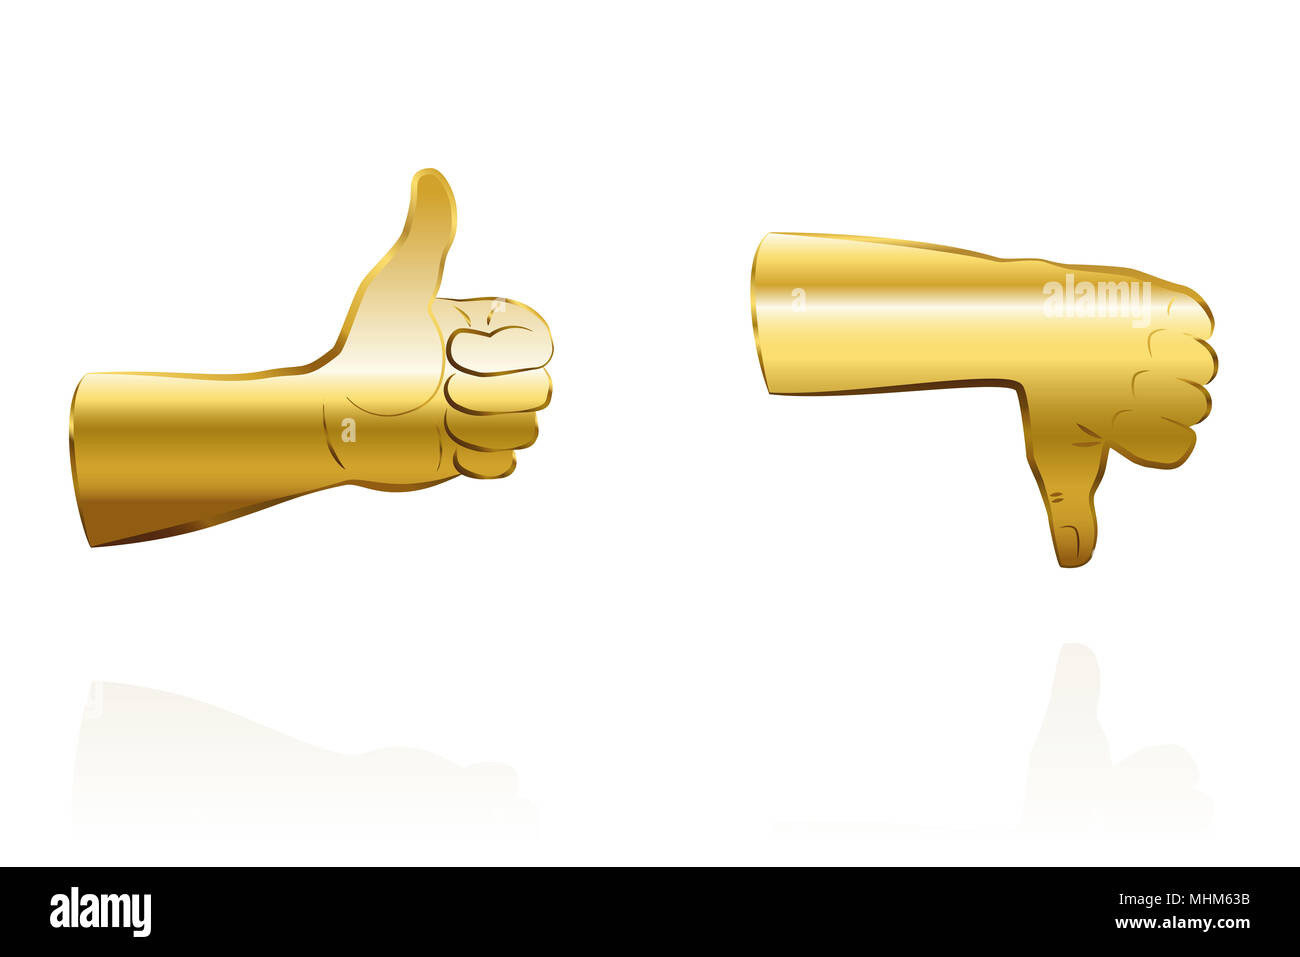 Golden thumbs up for agreement, and golden thumbs down for disagreement - illustration on white background. Stock Photo